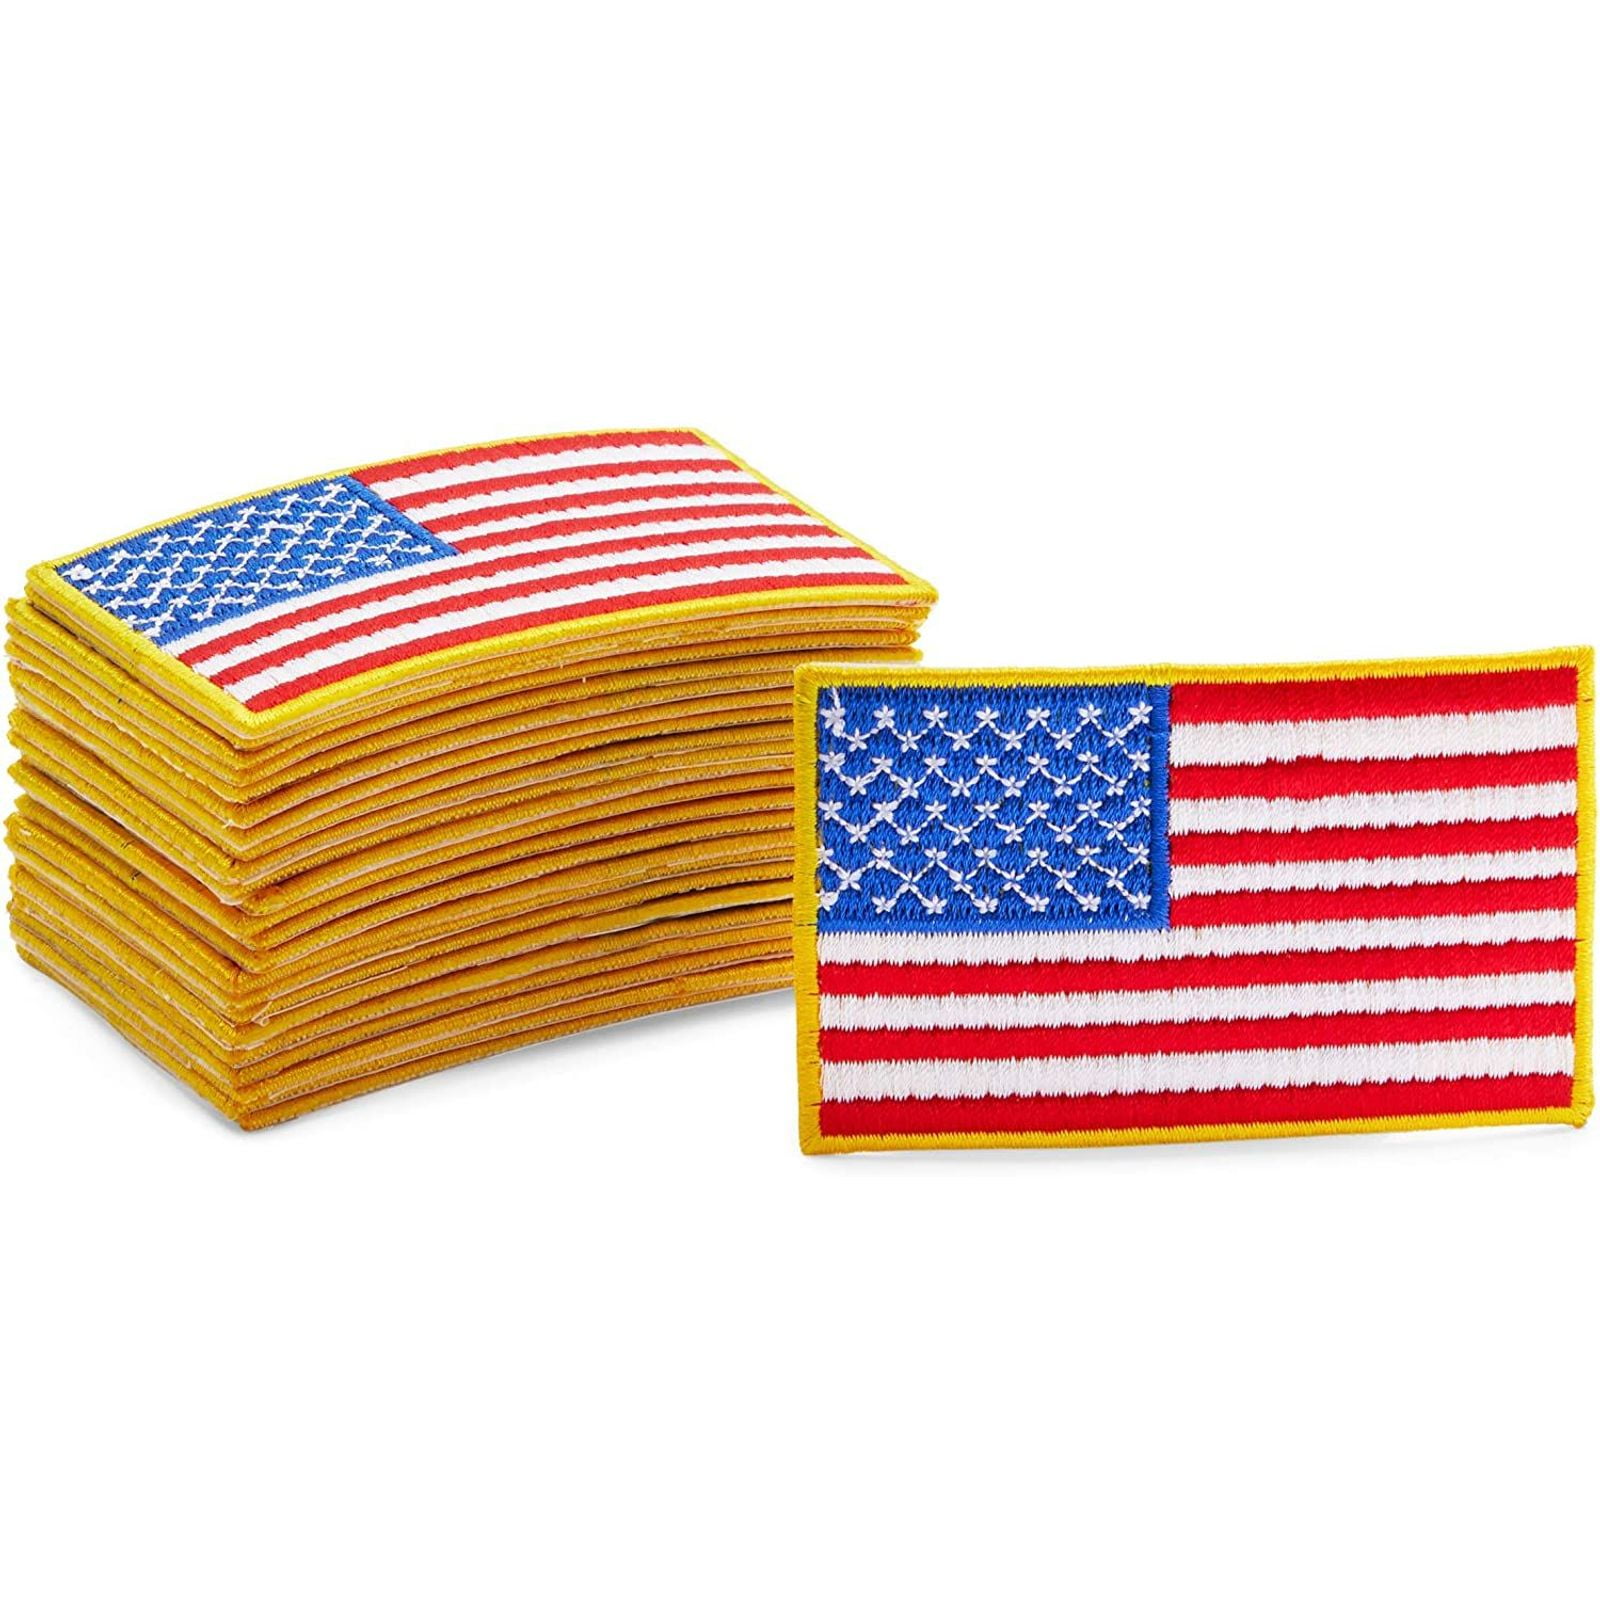 SET OF 3 SMALL USA AMERICAN FLAG EMBROIDERED PATCH IRON-ON SEW-ON GOLD BORDER 